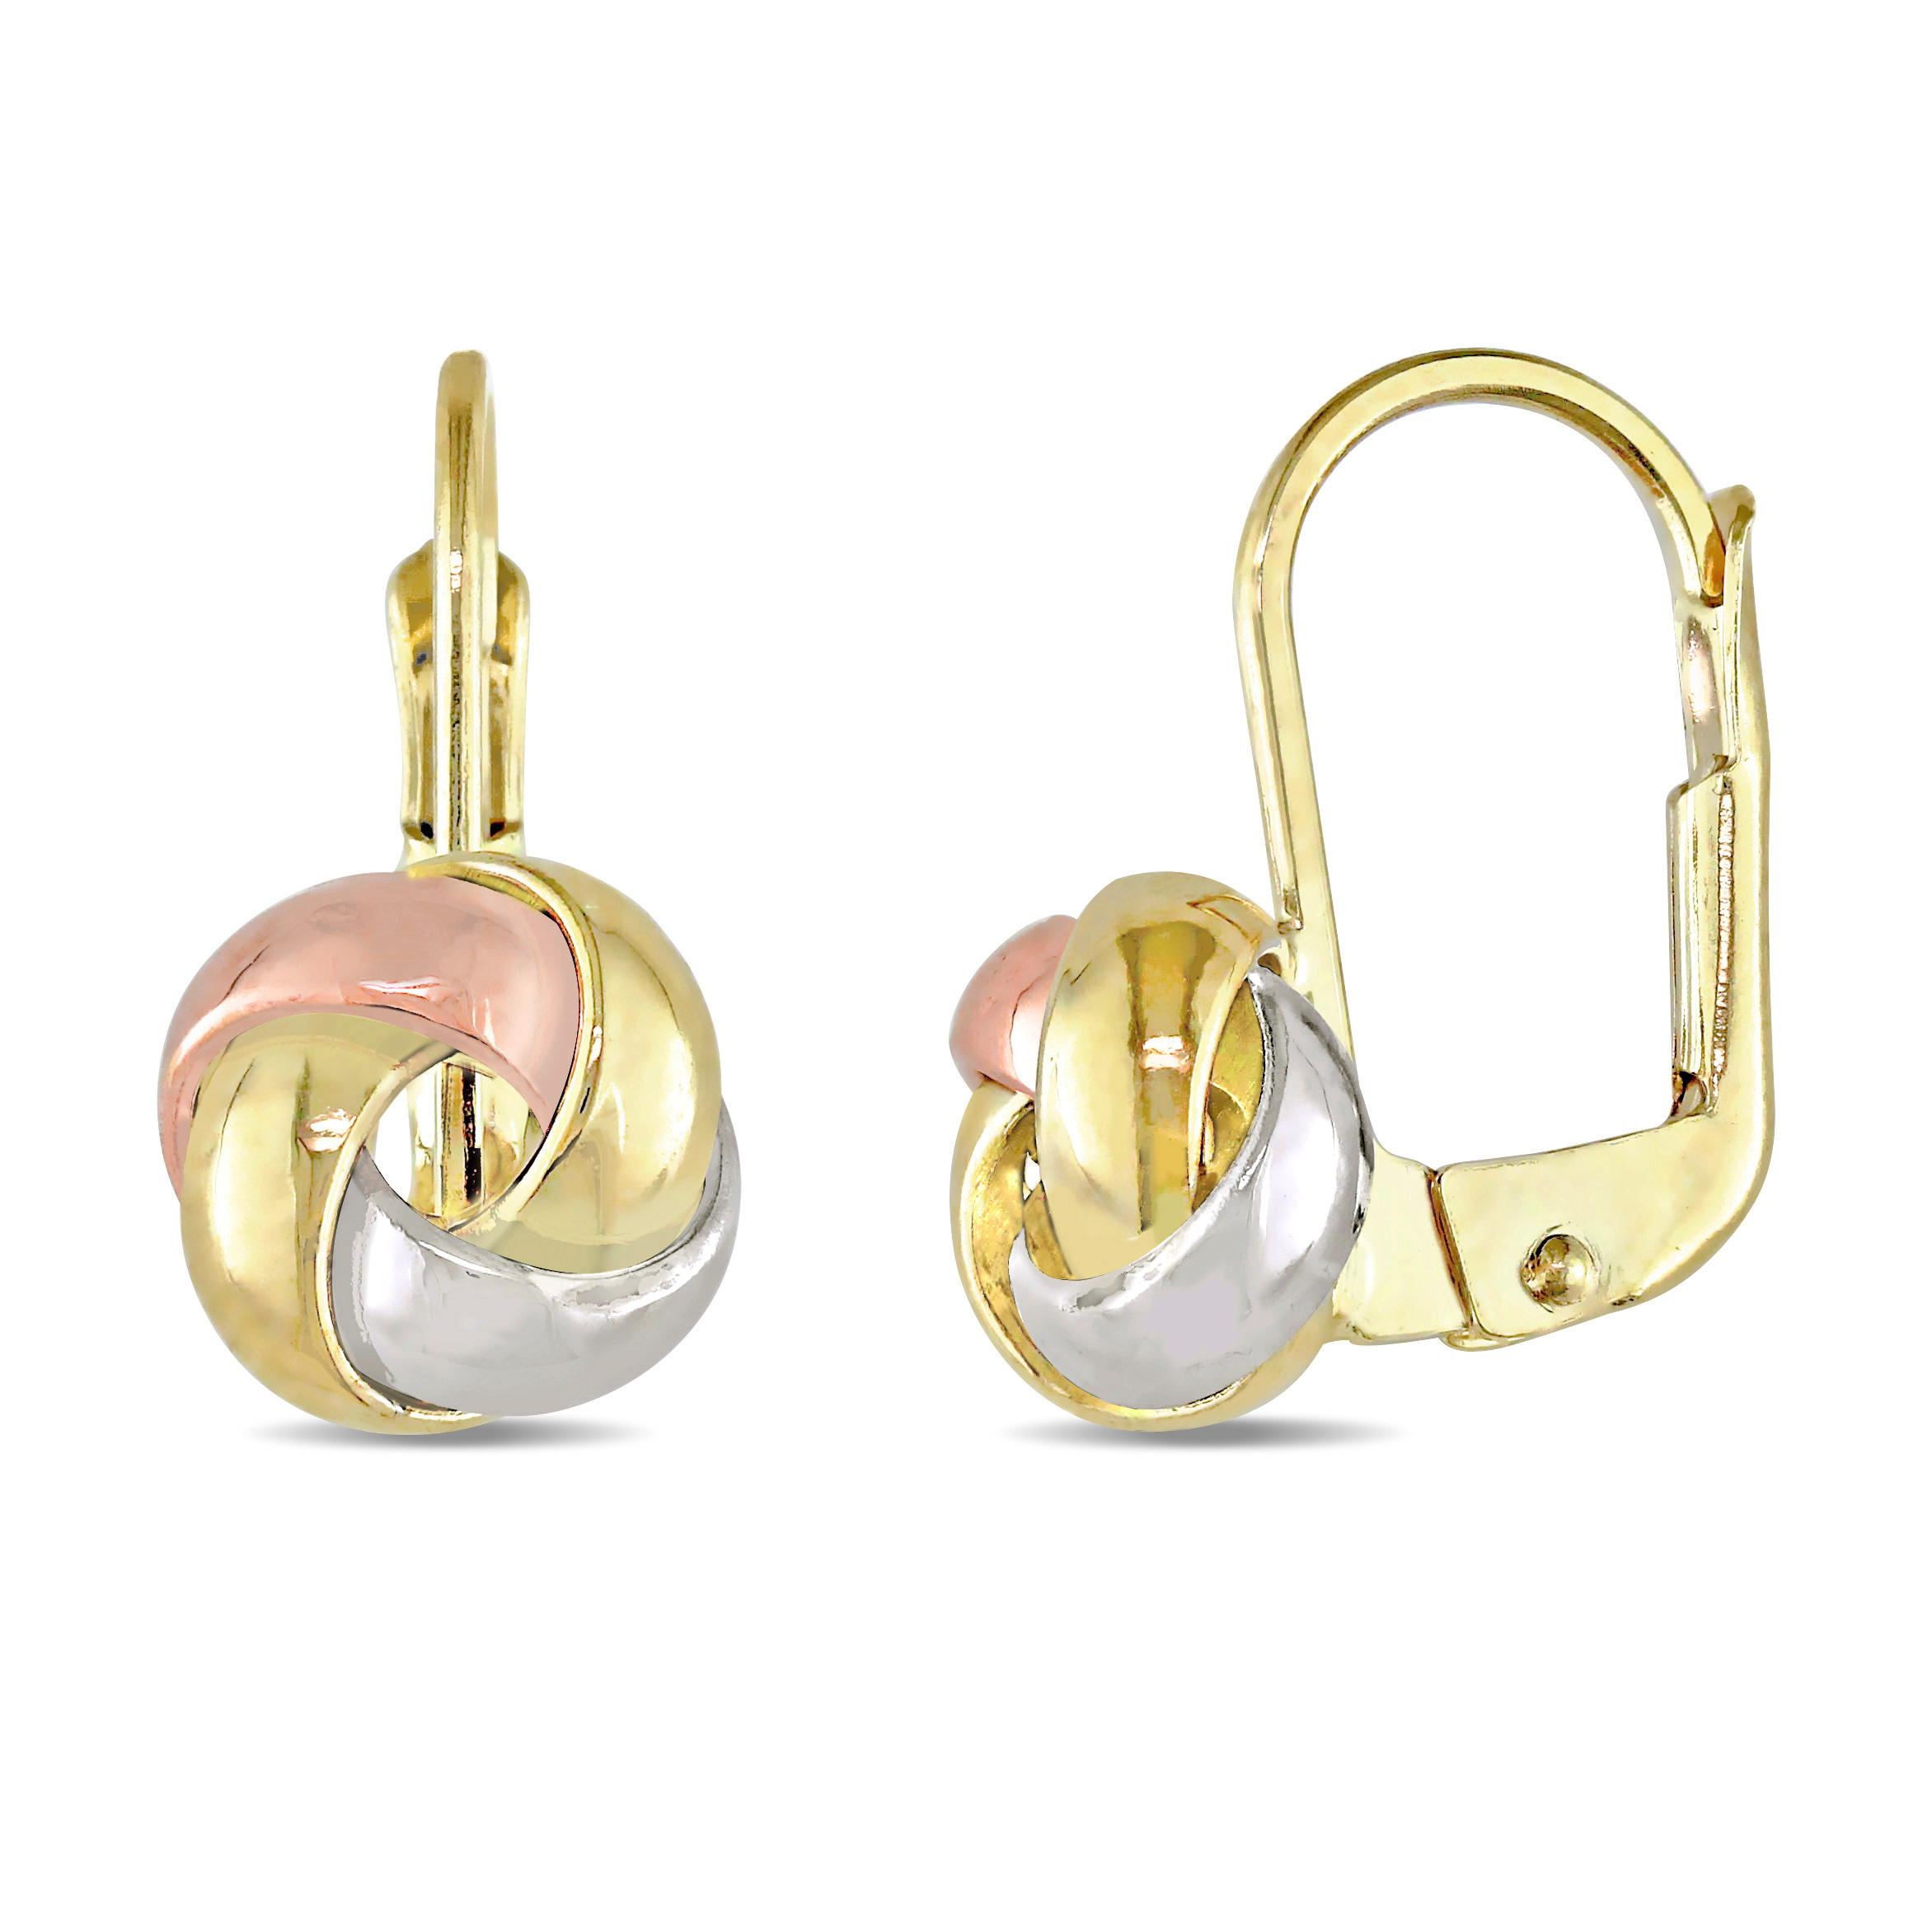 Entwined Polished Love Knot Leverback Earrings in 3-Tone 10k Yellow, Rose and White Gold